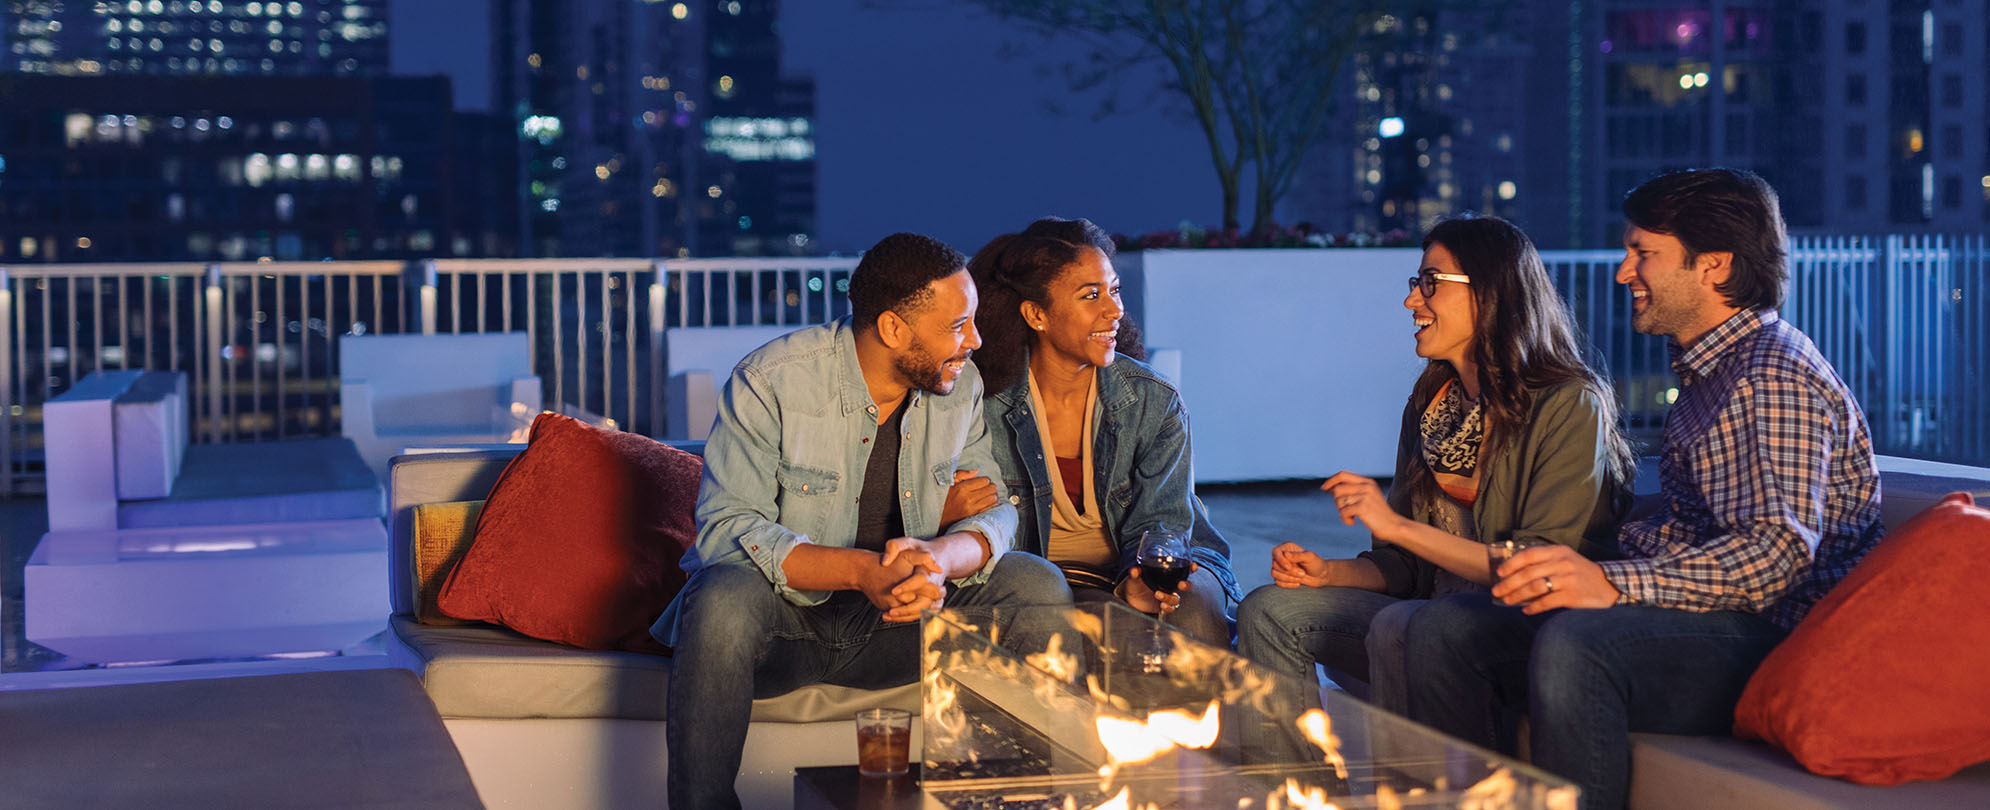 Two couples sitting and talking around a glass fire pit at the rooftop deck of a WorldMark resort.